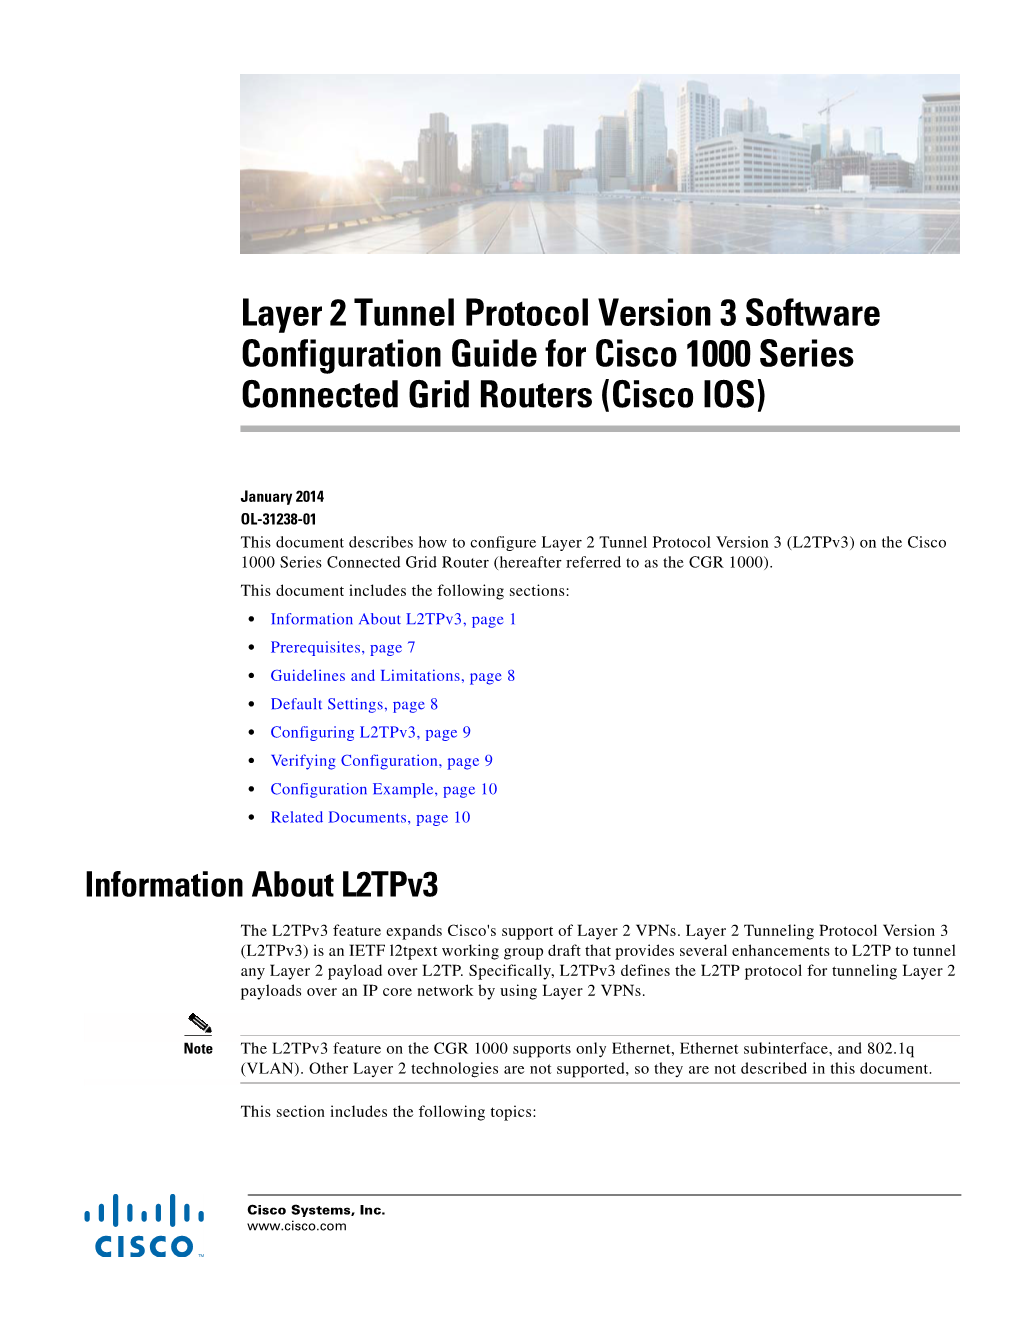 Layer 2 Tunnel Protocol Version 3 Software Configuration Guide for Cisco 1000 Series Connected Grid Routers (Cisco IOS)